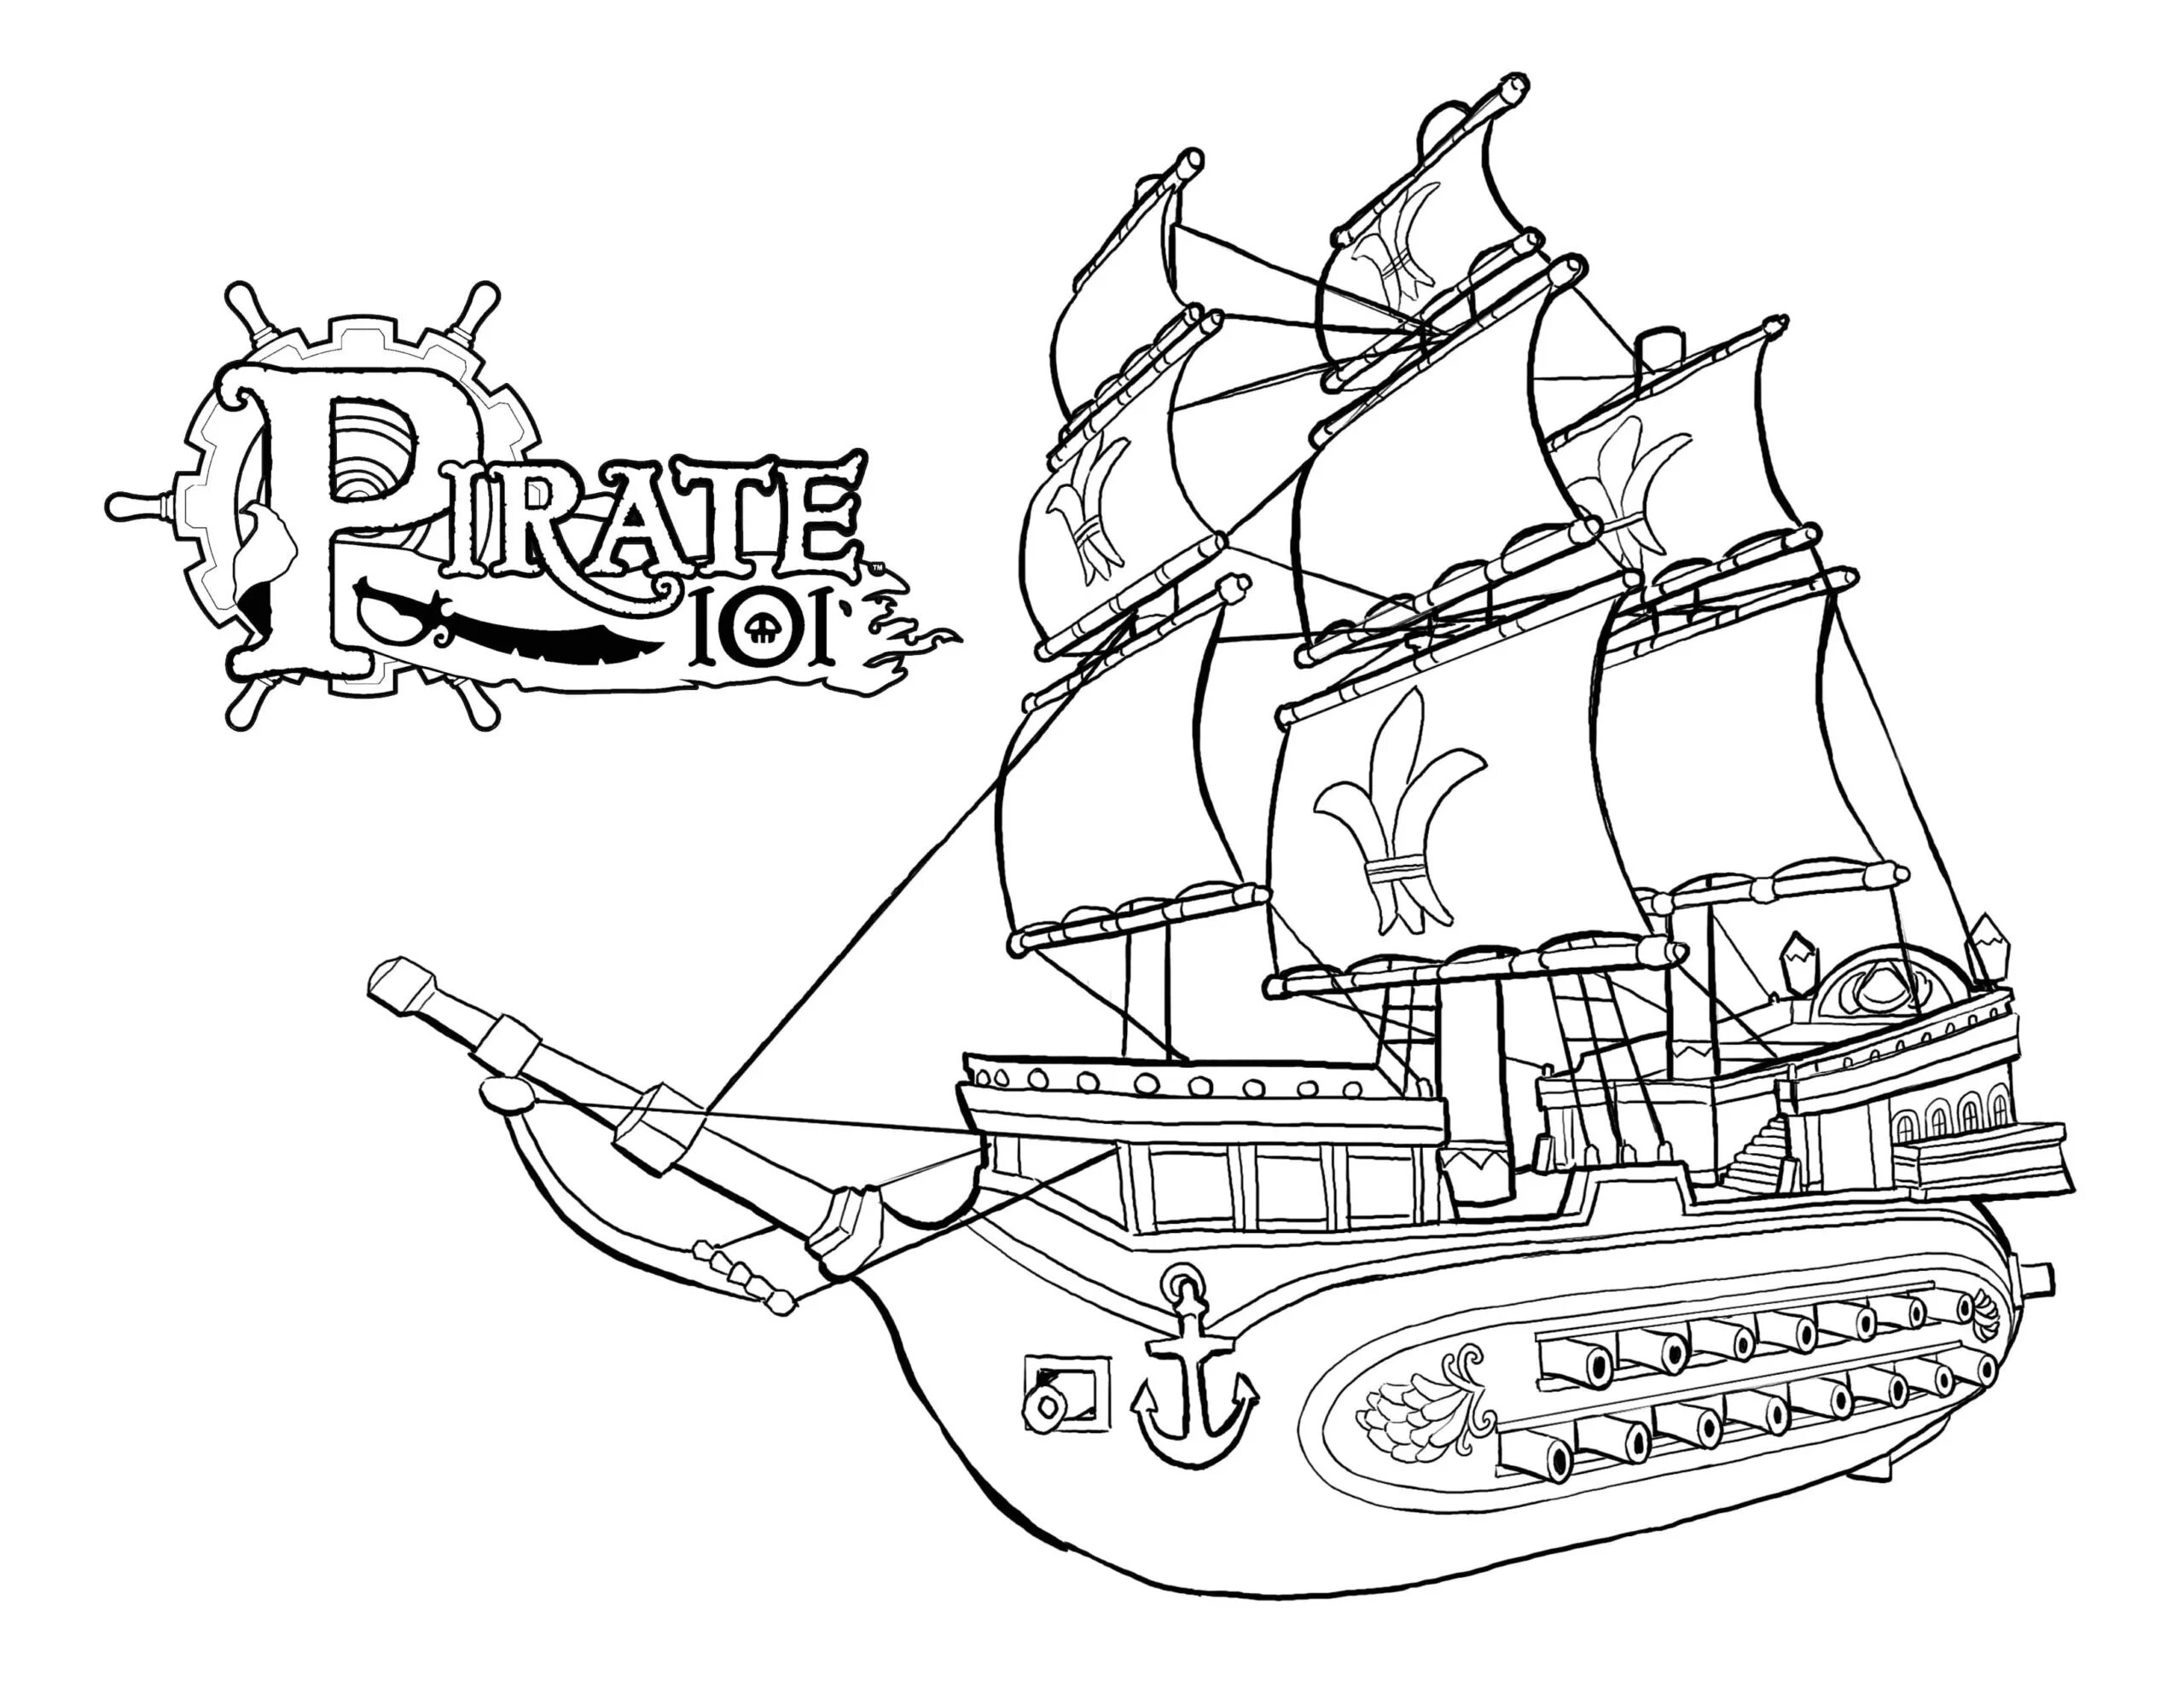 Fabulous pirate ship coloring pages for kids